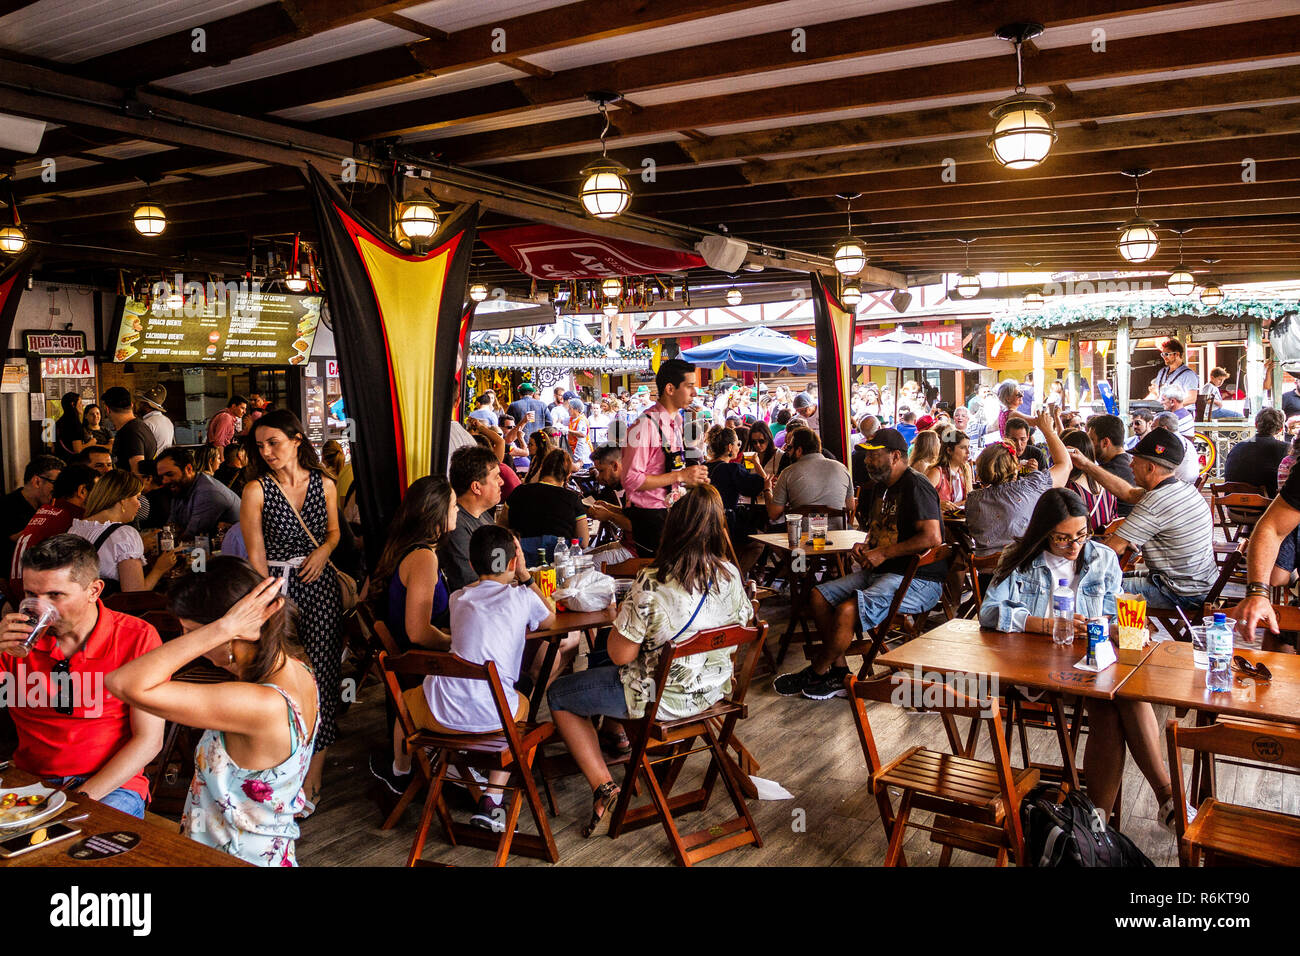 People seen at the restaurant during the festival. Oktoberfest 2018 is a Germany beer festival in Blumenau, a Brazilian city founded by German immigrants. Blumenau, Santa Catarina, Brazil. Stock Photo